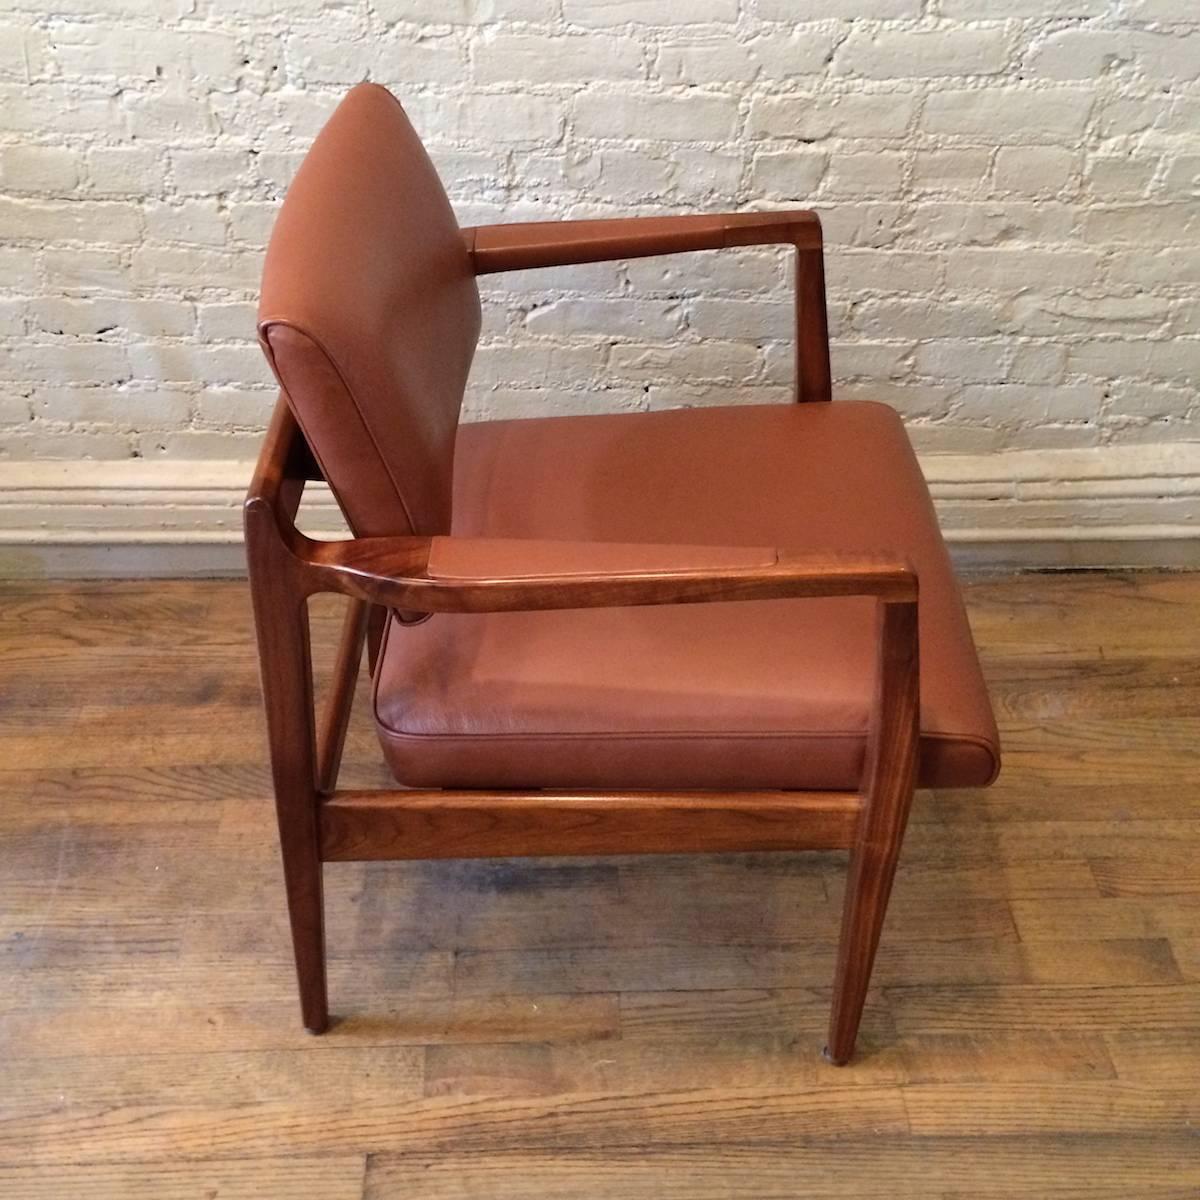 Mid-Century Modern Leather Walnut Armchair By Jens Risom In Good Condition For Sale In Brooklyn, NY